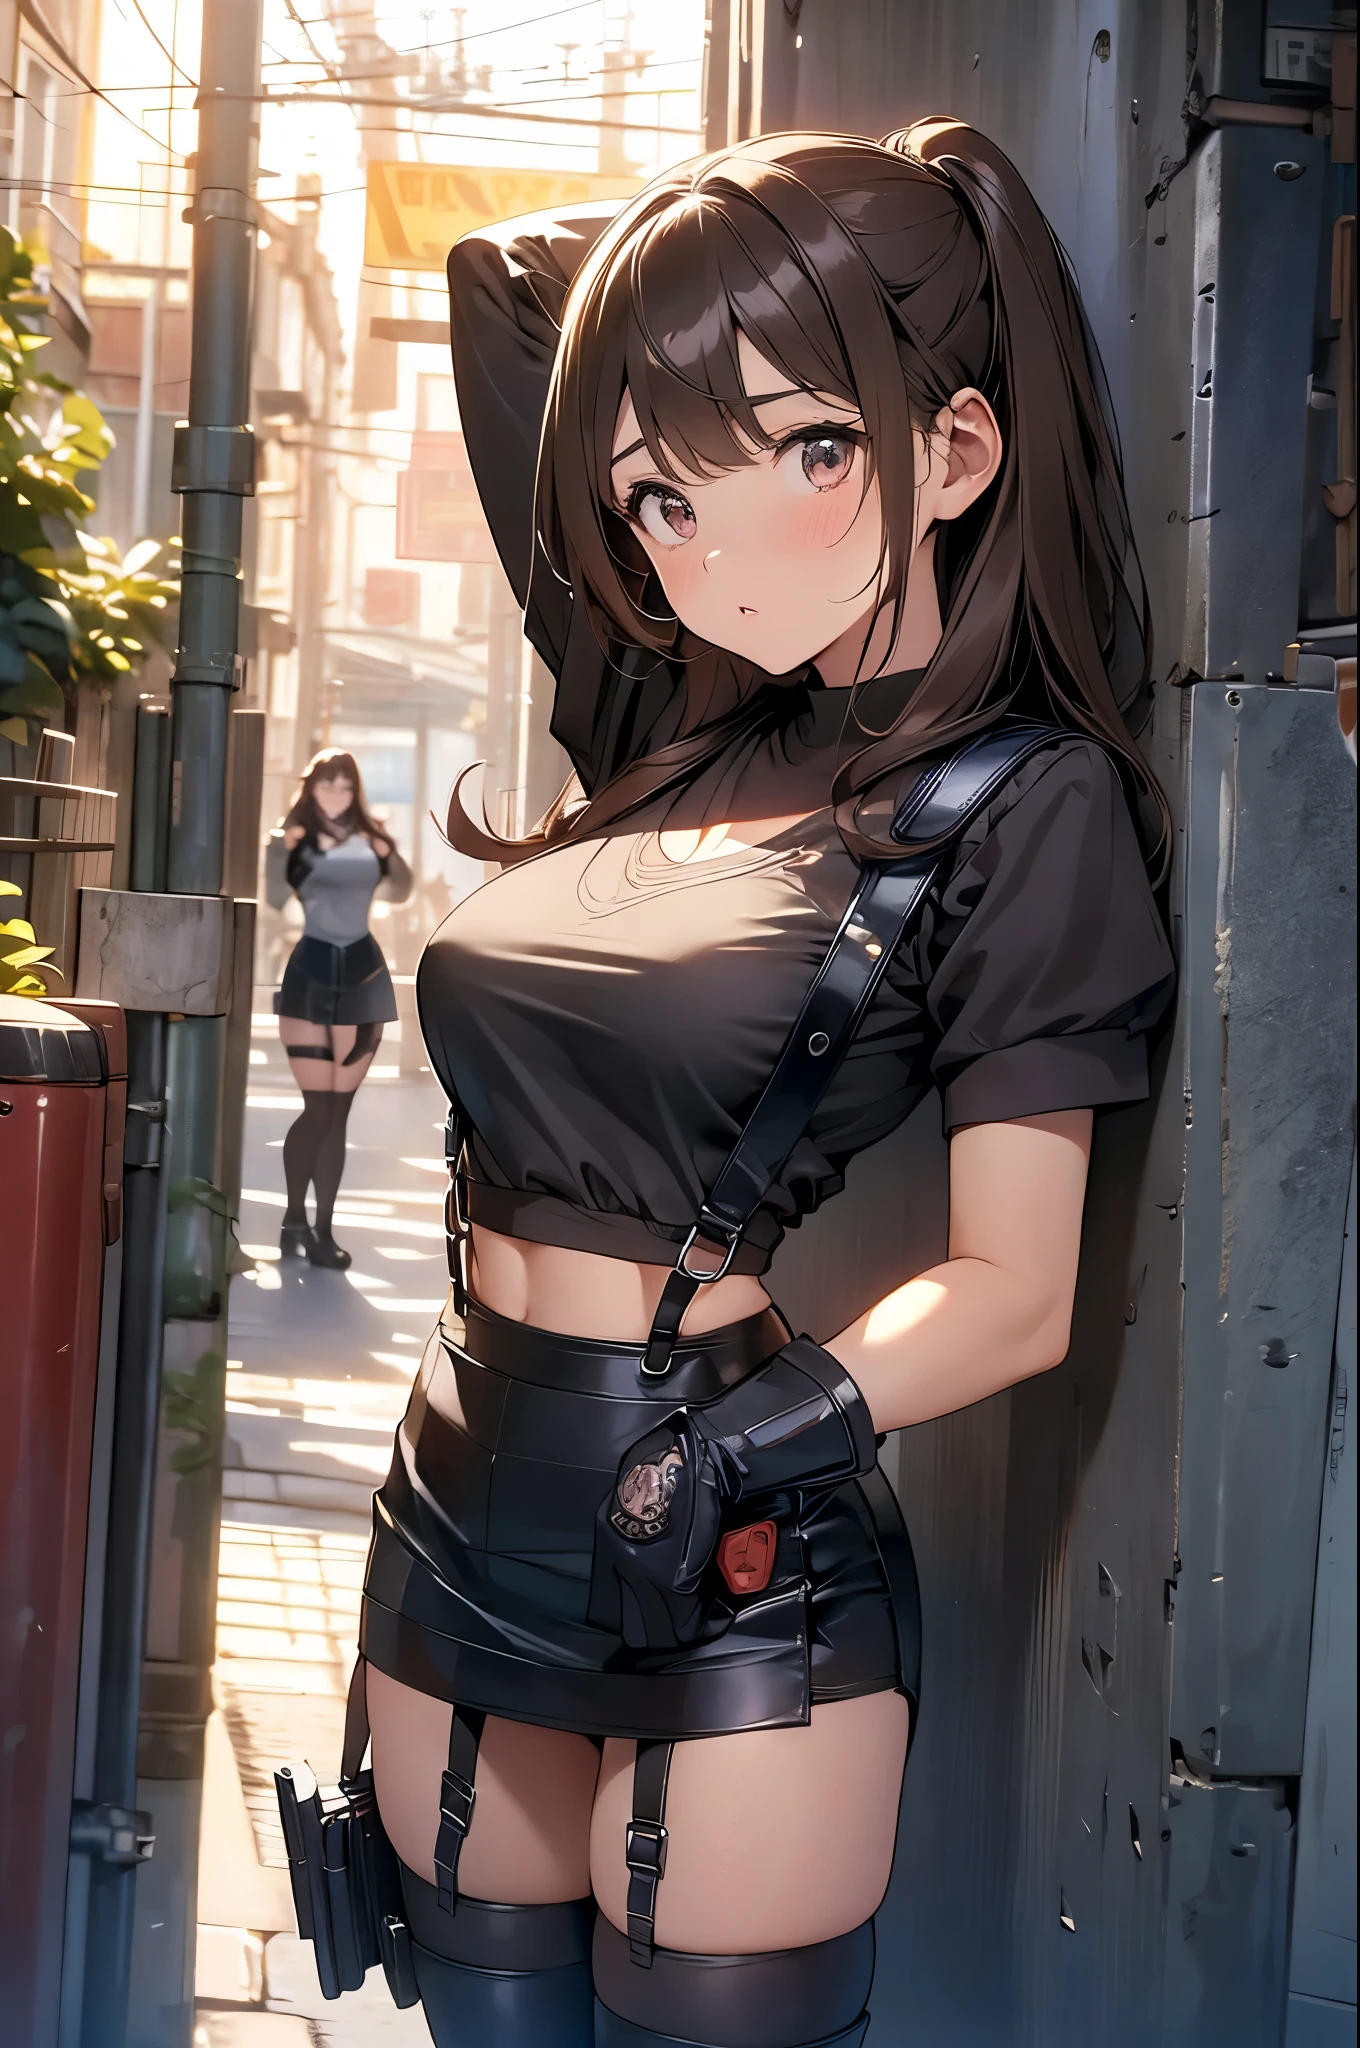 Brown hair、watching at viewers　　　black suspenders　　　Bulging big breasts　　 　 　　　walls: 　Black miniskirt　garters　　　　　　Gaze　　　Small face　bangss 　　　holster　　　Beautuful Women　　hands up　　レッグholster ベッドに横たわる　　Gaze 　black boots panty shot　provocation　flank　flank汗　soio 　arm